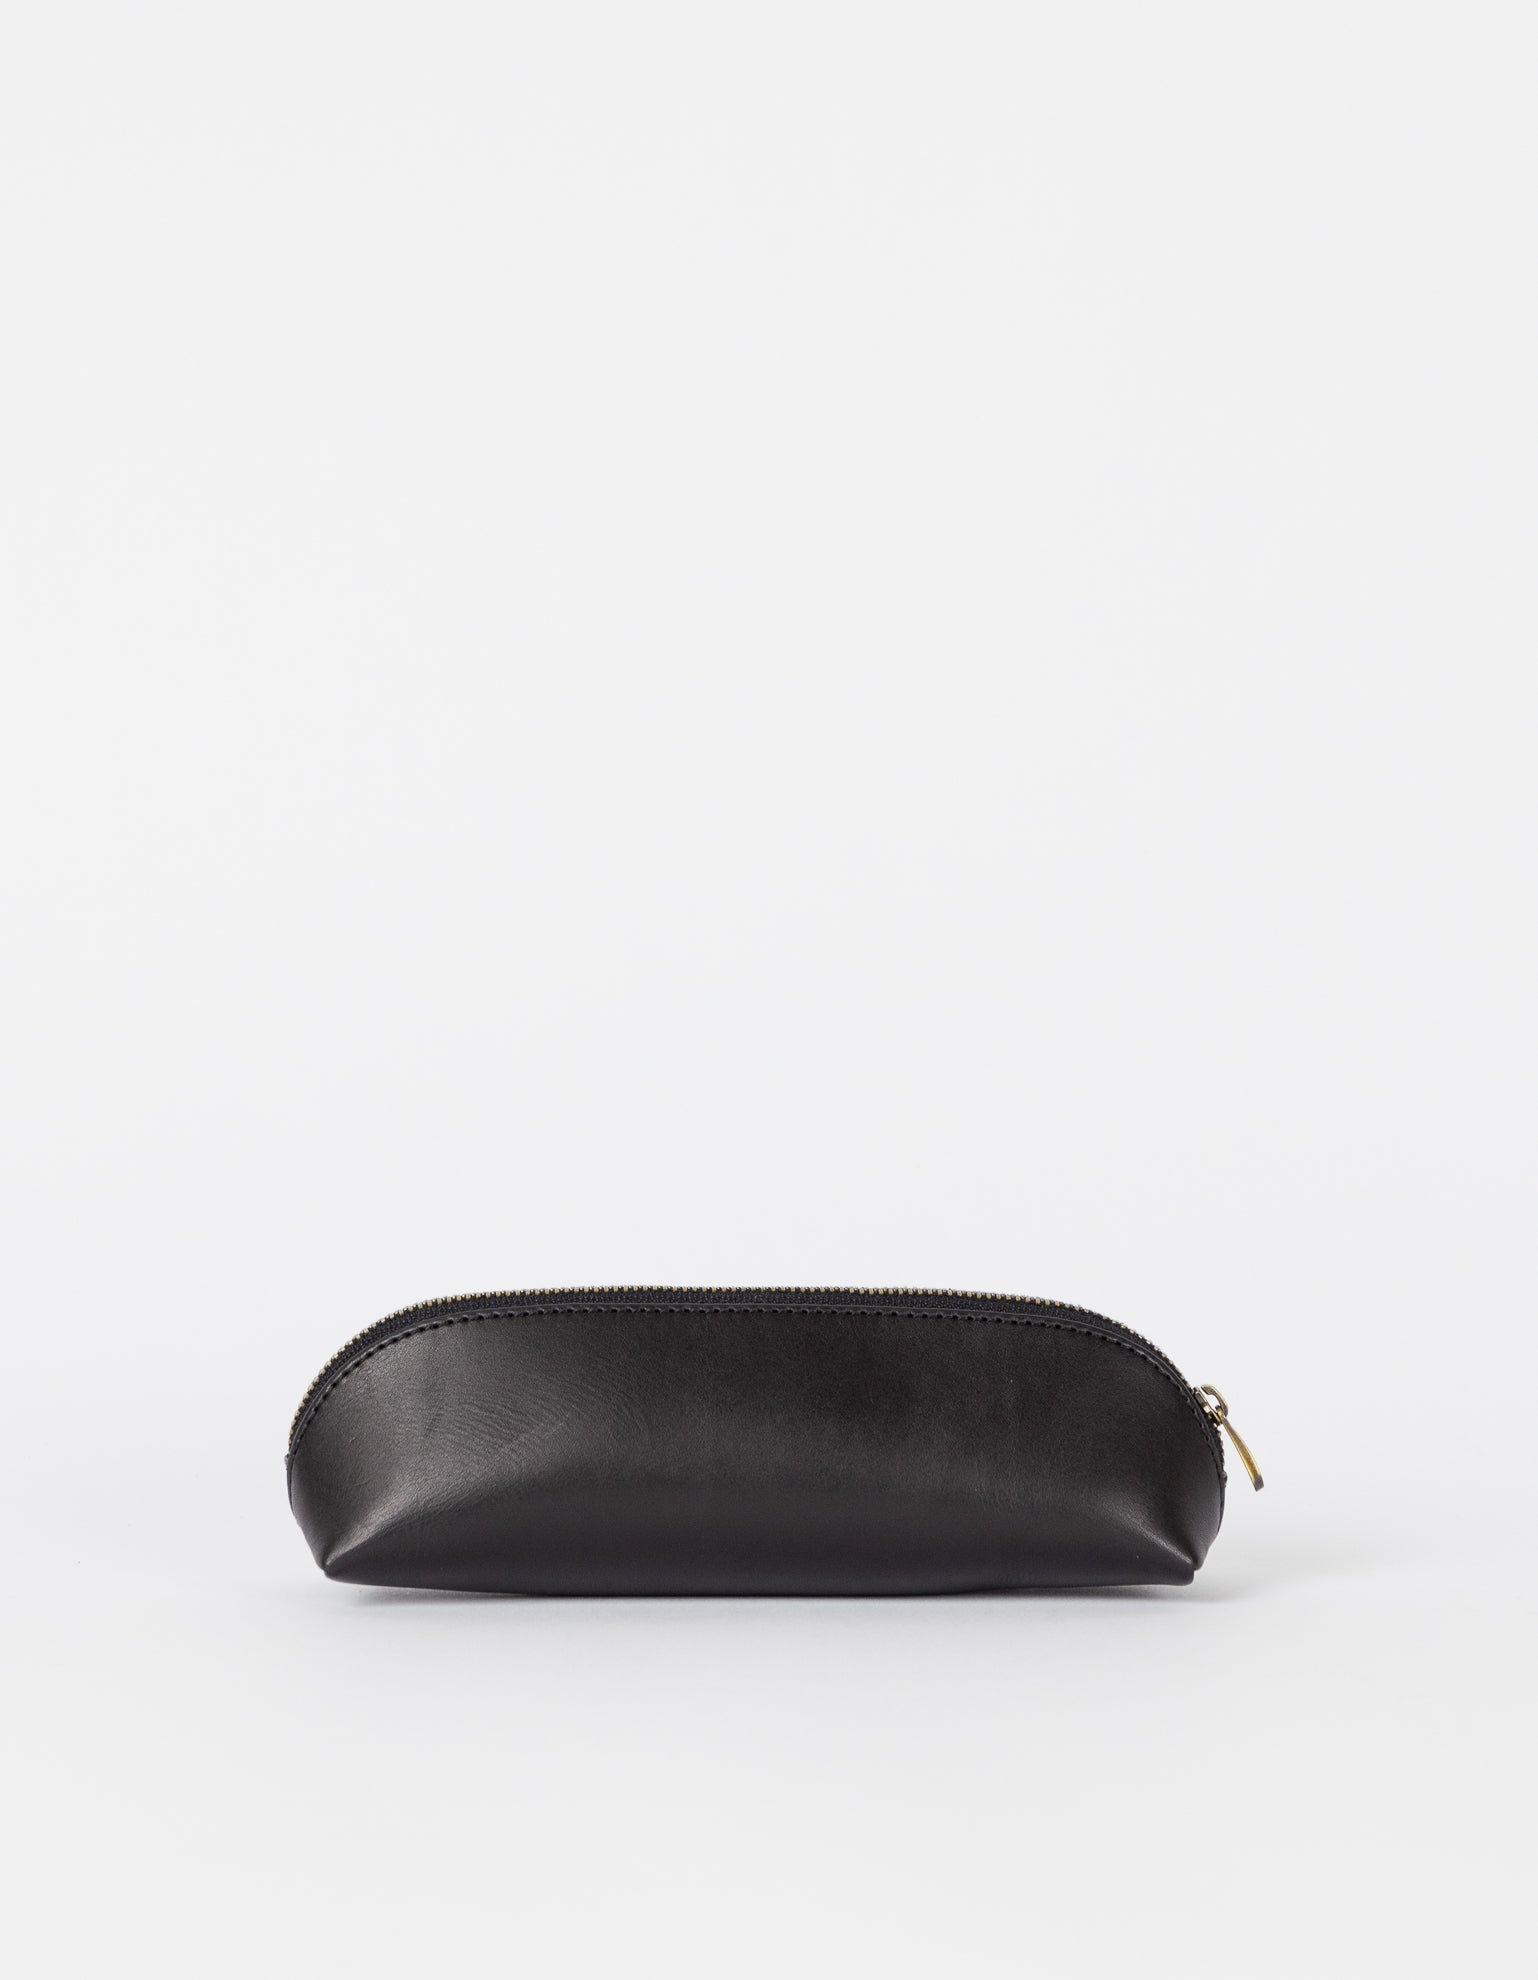 O My Bag Pencil Case Small - Black Classic Leather